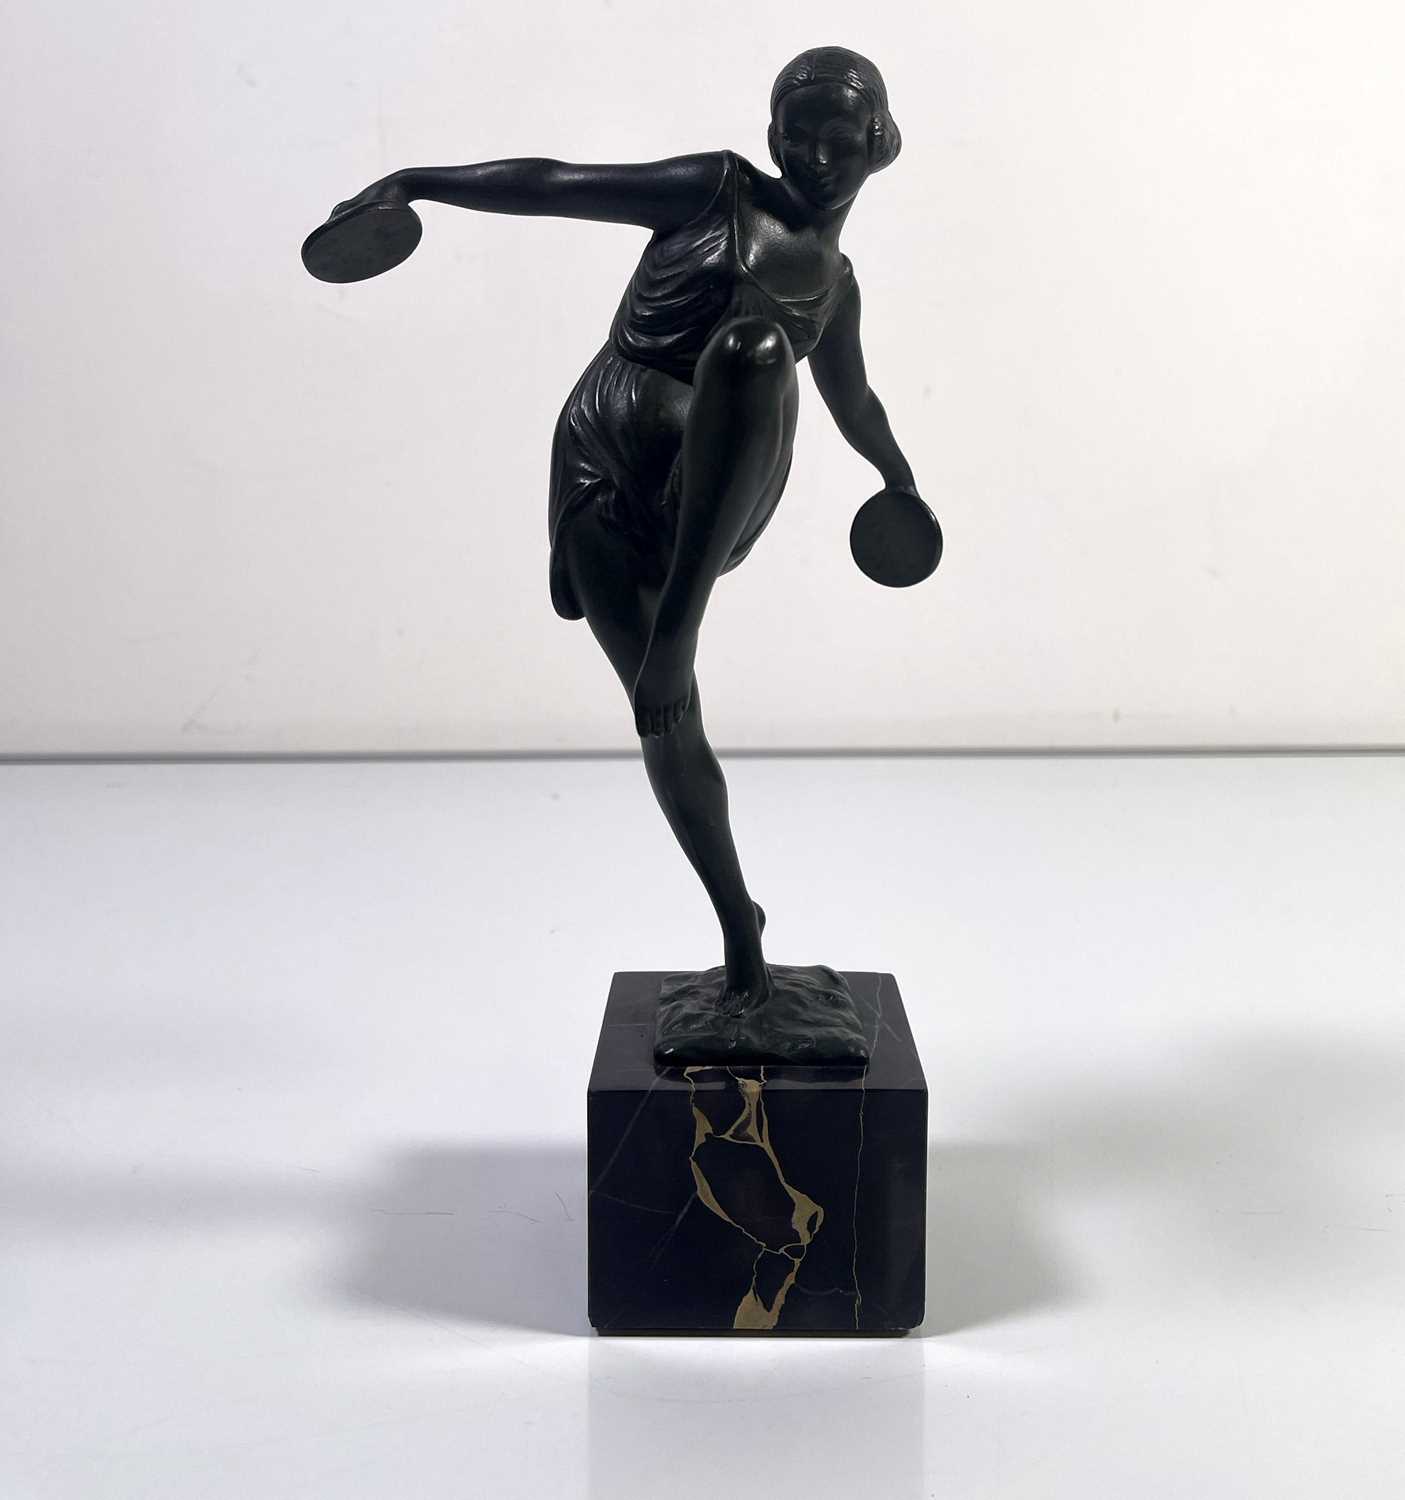 ART DECO FIGURE BY FAVRAL. - Image 2 of 5